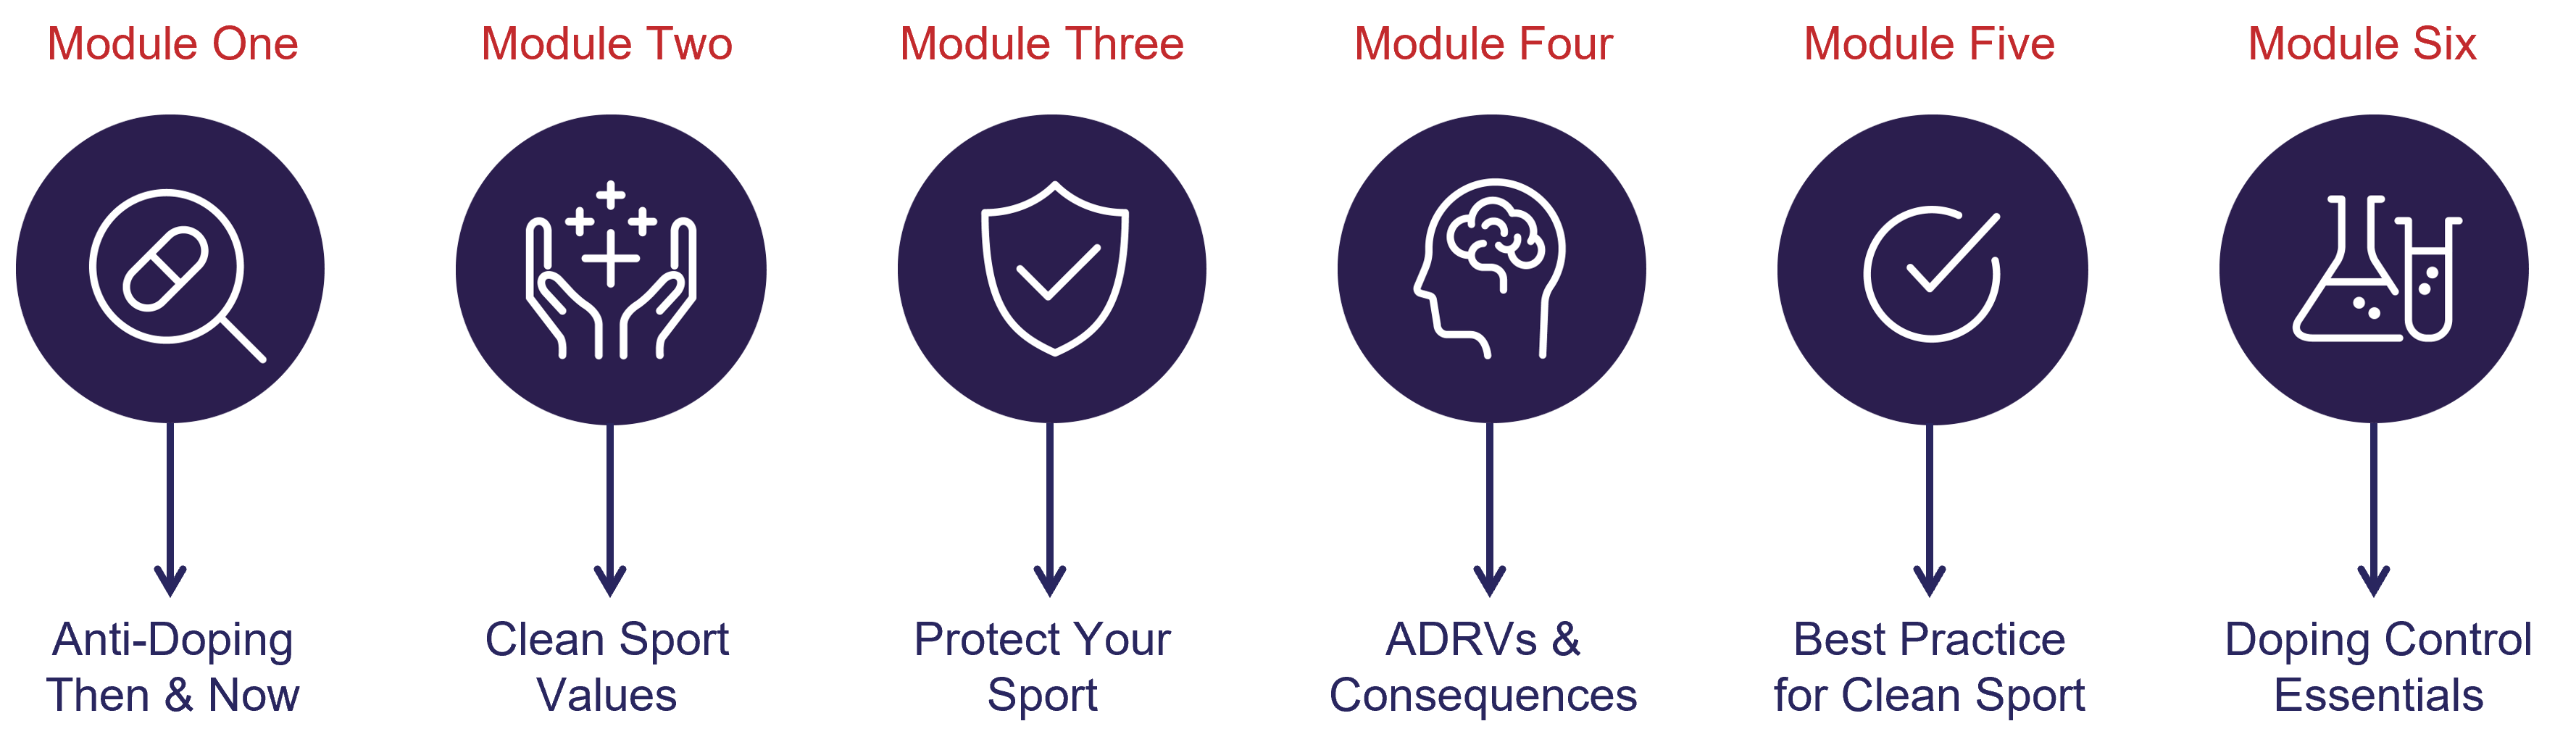 This diagram displays the six modules of the course: (1) Anti-Doping Then and Now, (2) Clean Sport Values, (3) Protect Your Sport, (4) ADRVs and Consequences, (5) Best Practice for Clean Sport and (6) Doping Control Essentials. 